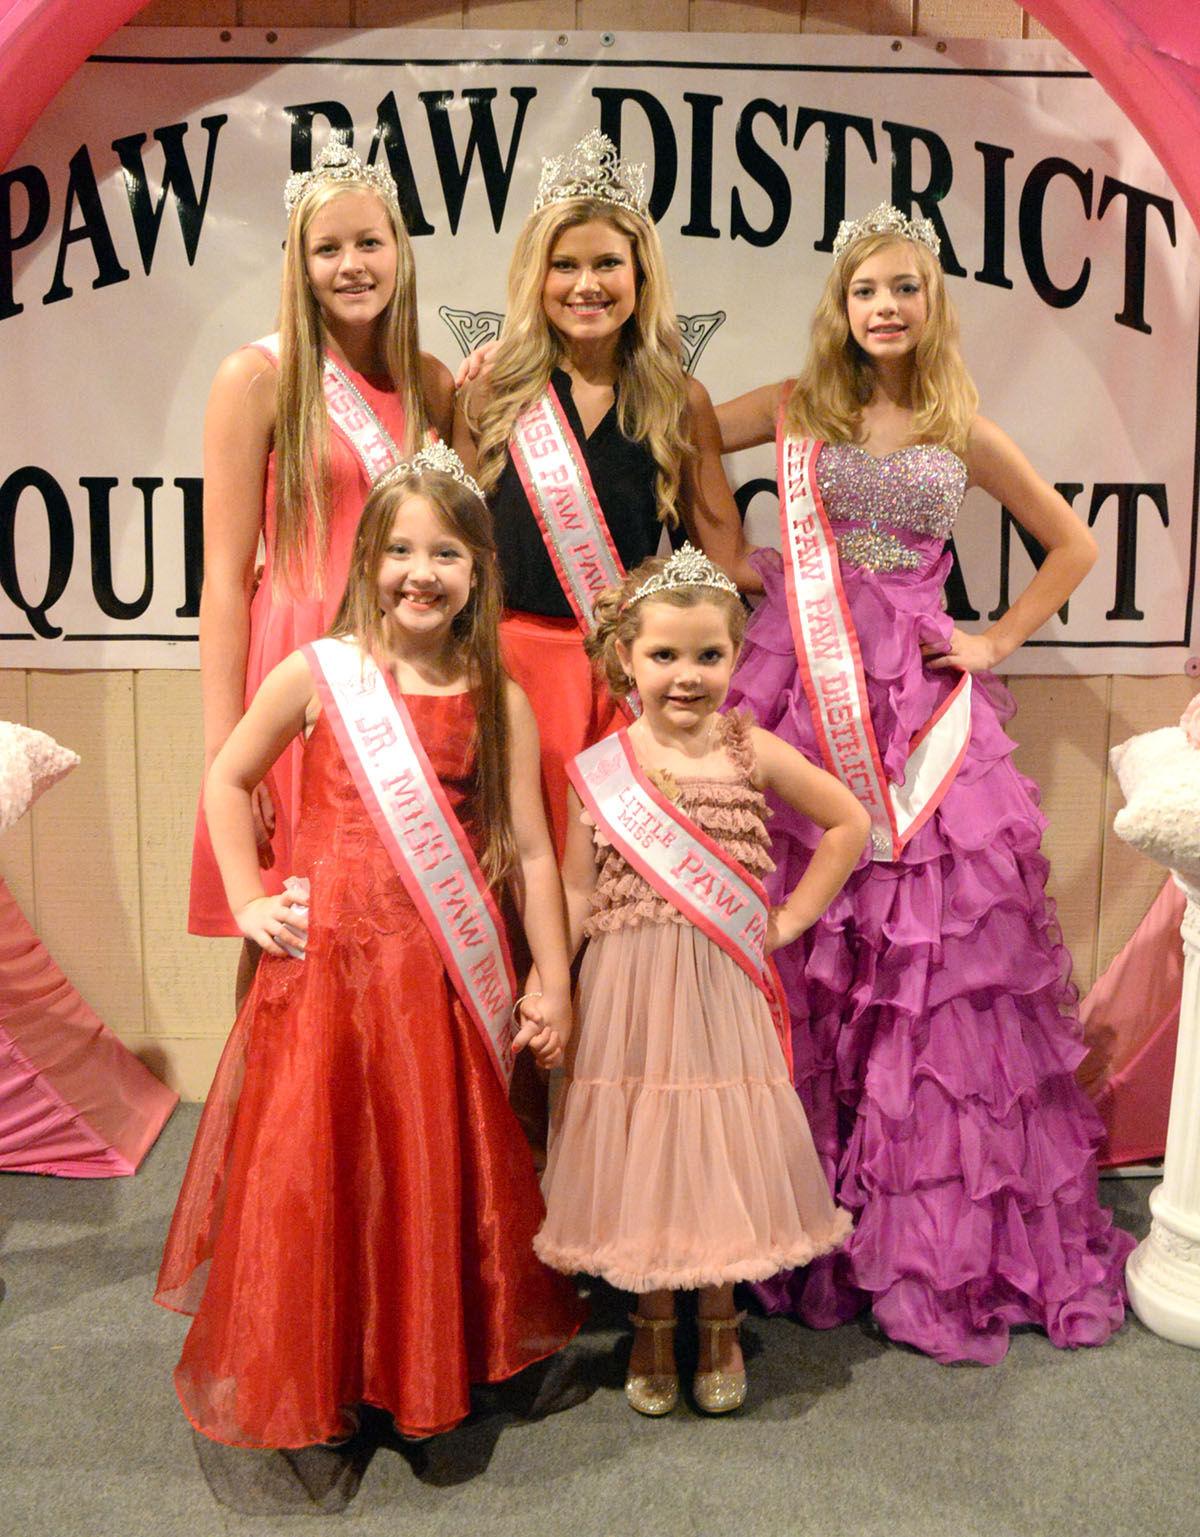 Pageant queens crowned at Paw Paw District Fair PHOTOS News